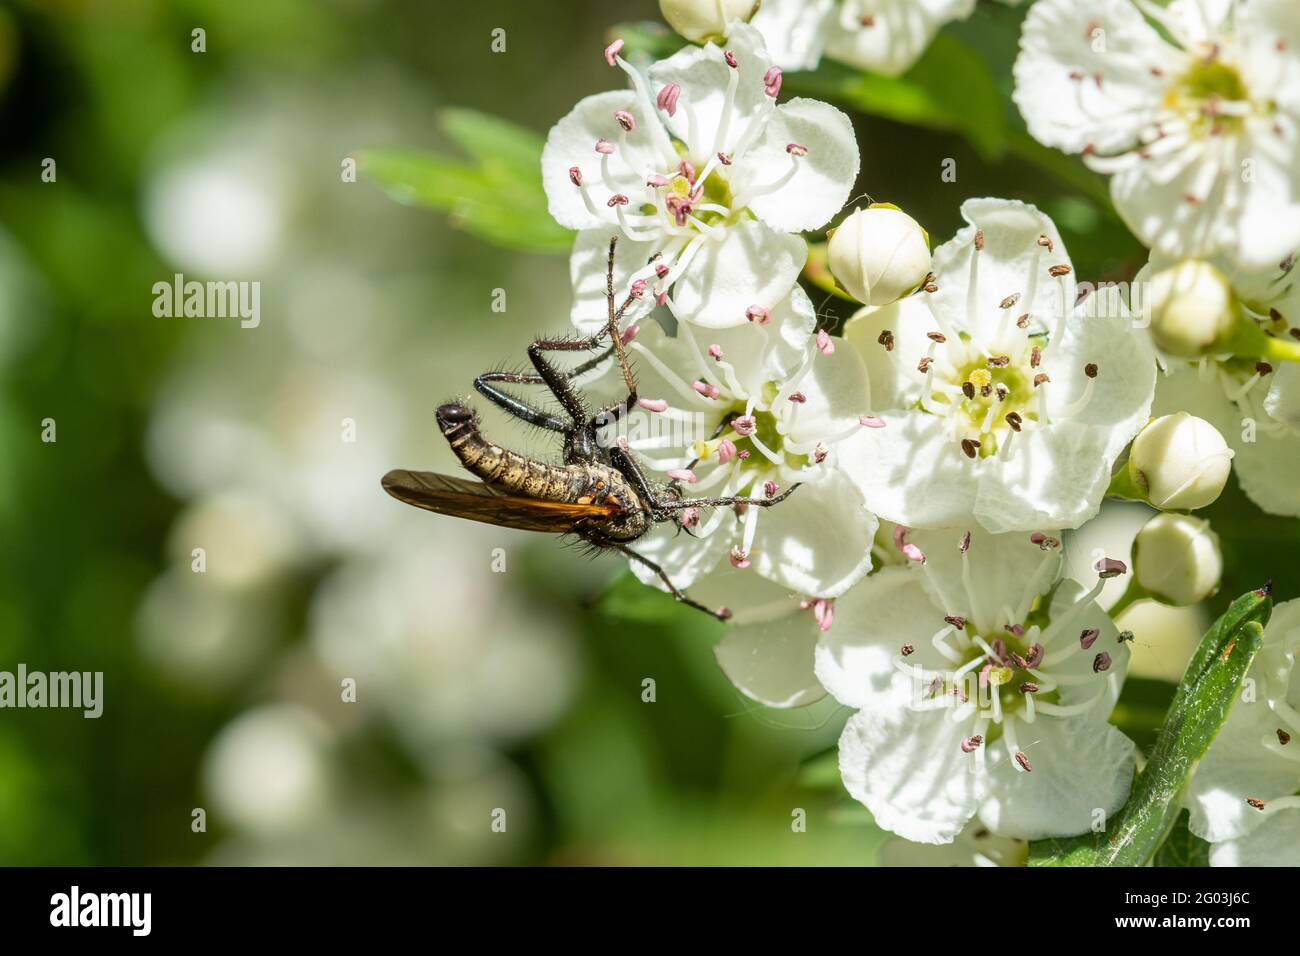 Bibio marci, also called St Mark's fly or Hawthorn fly, drinking nectar from hawthorn flowers, UK, during May Stock Photo